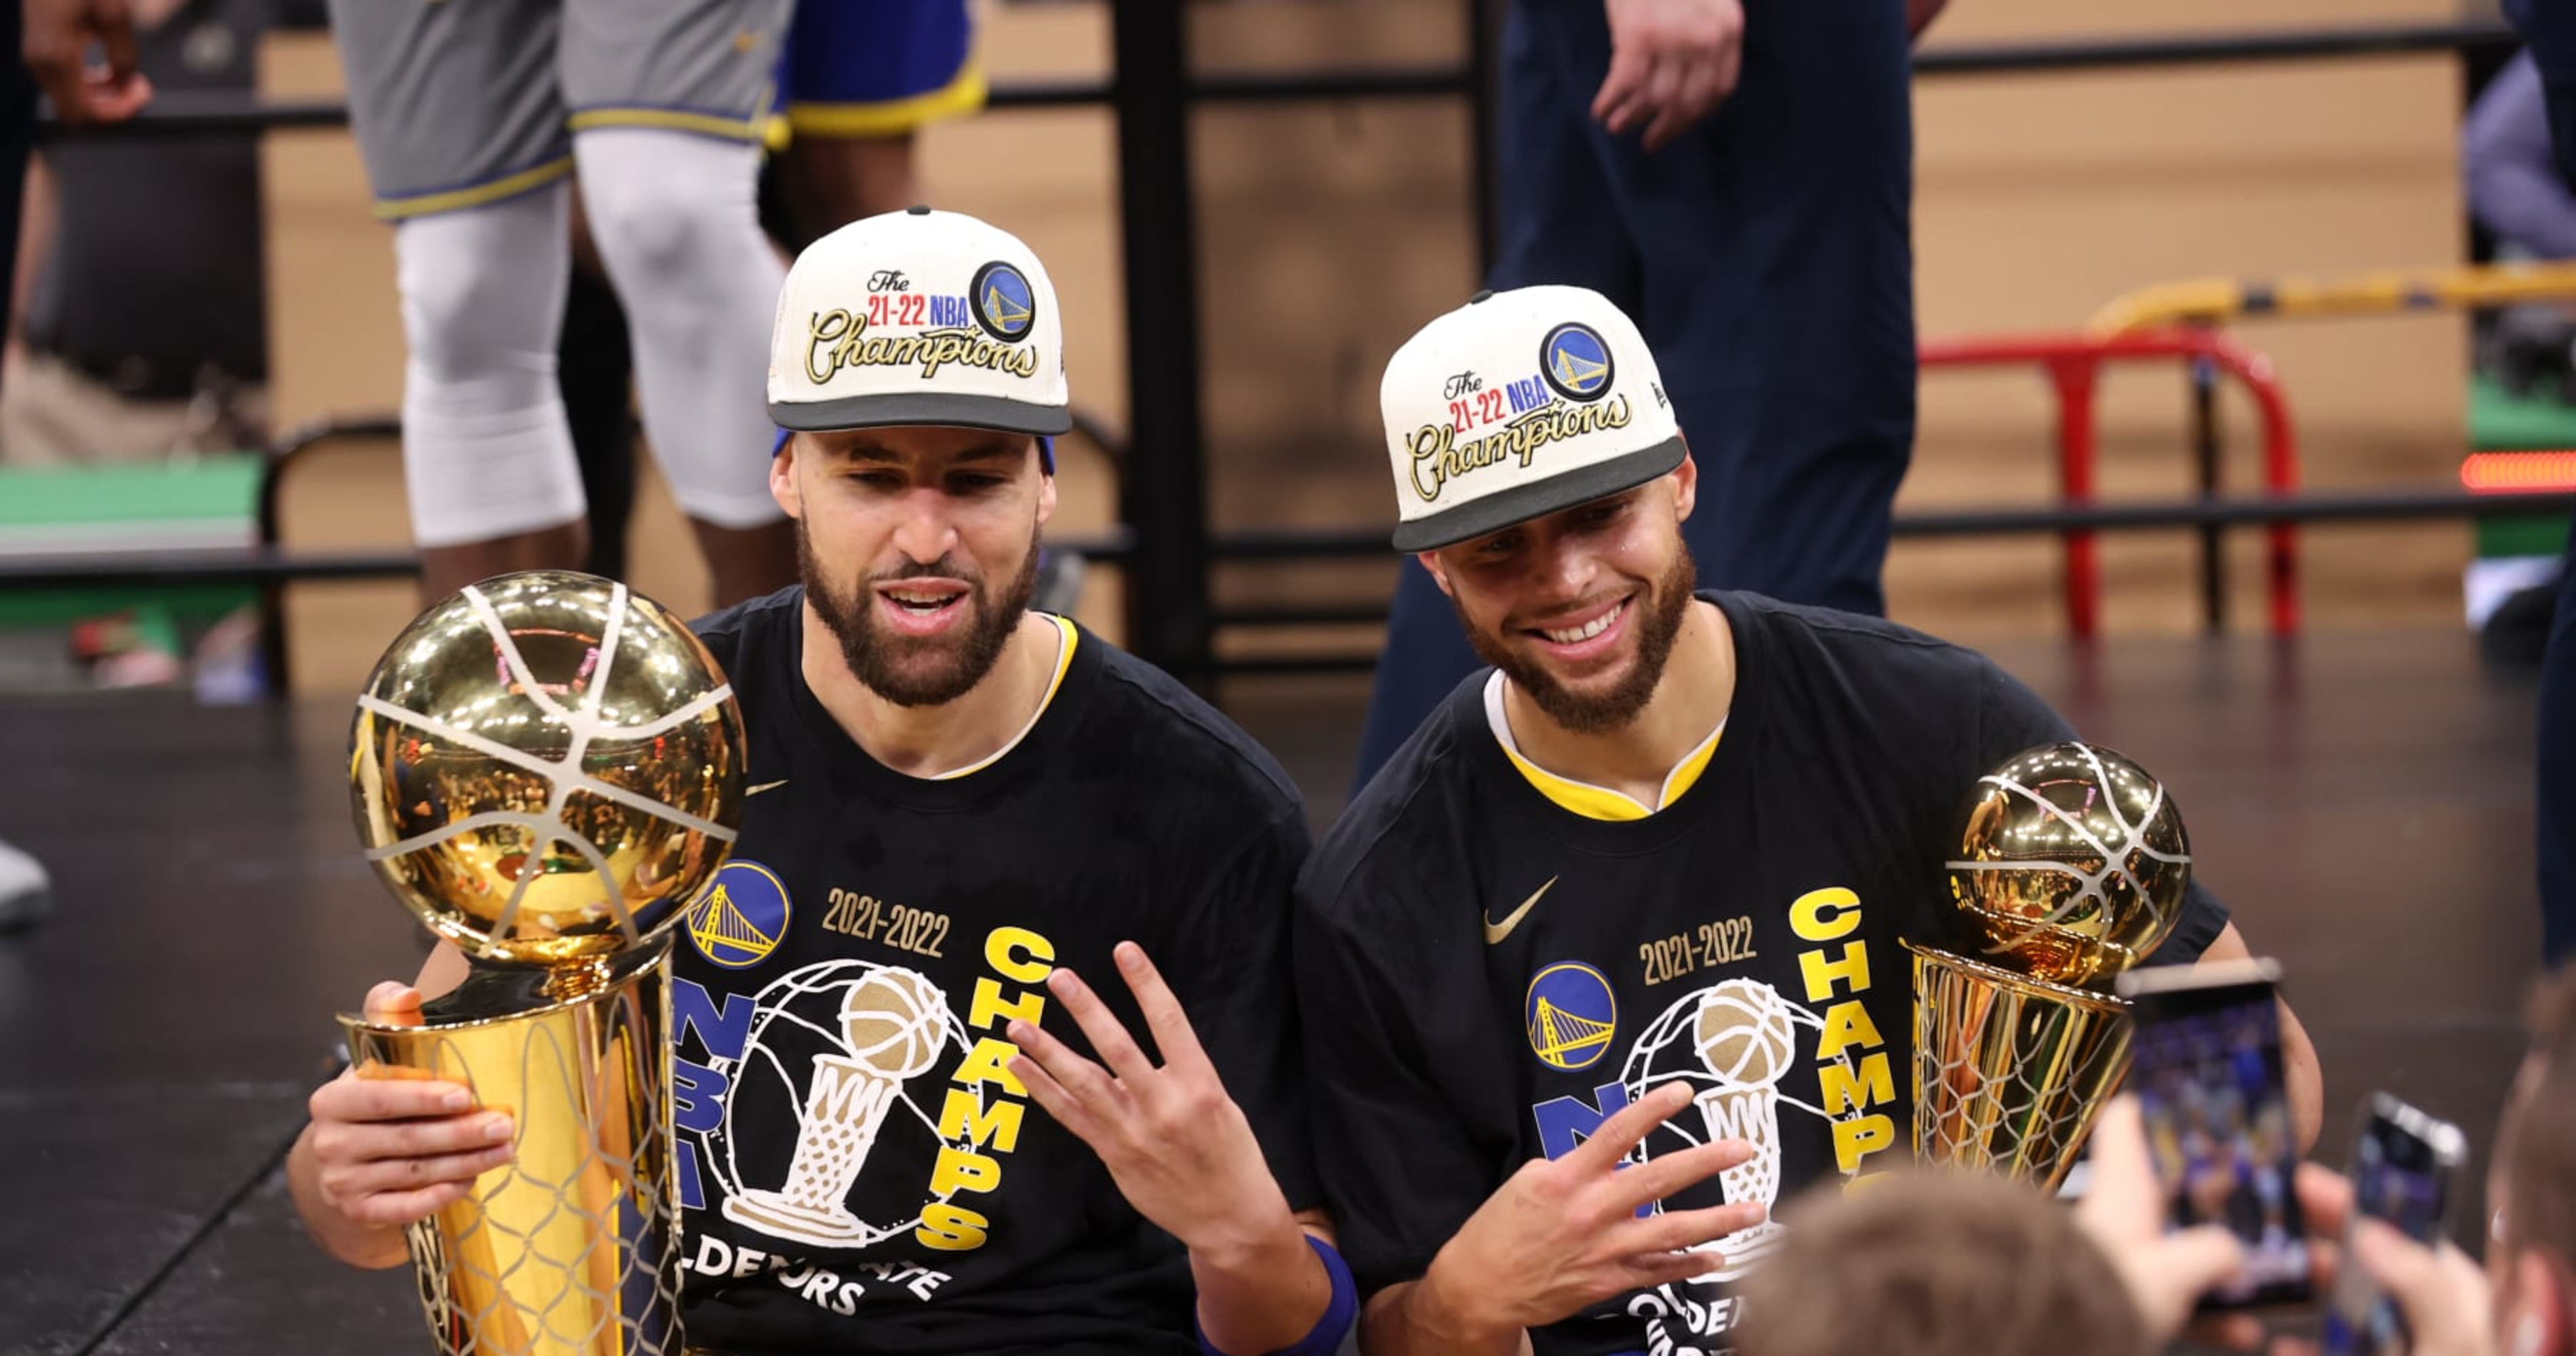 The worst takes about Steph Curry, Klay Thompson, Draymond Green from their NBA  Draft days